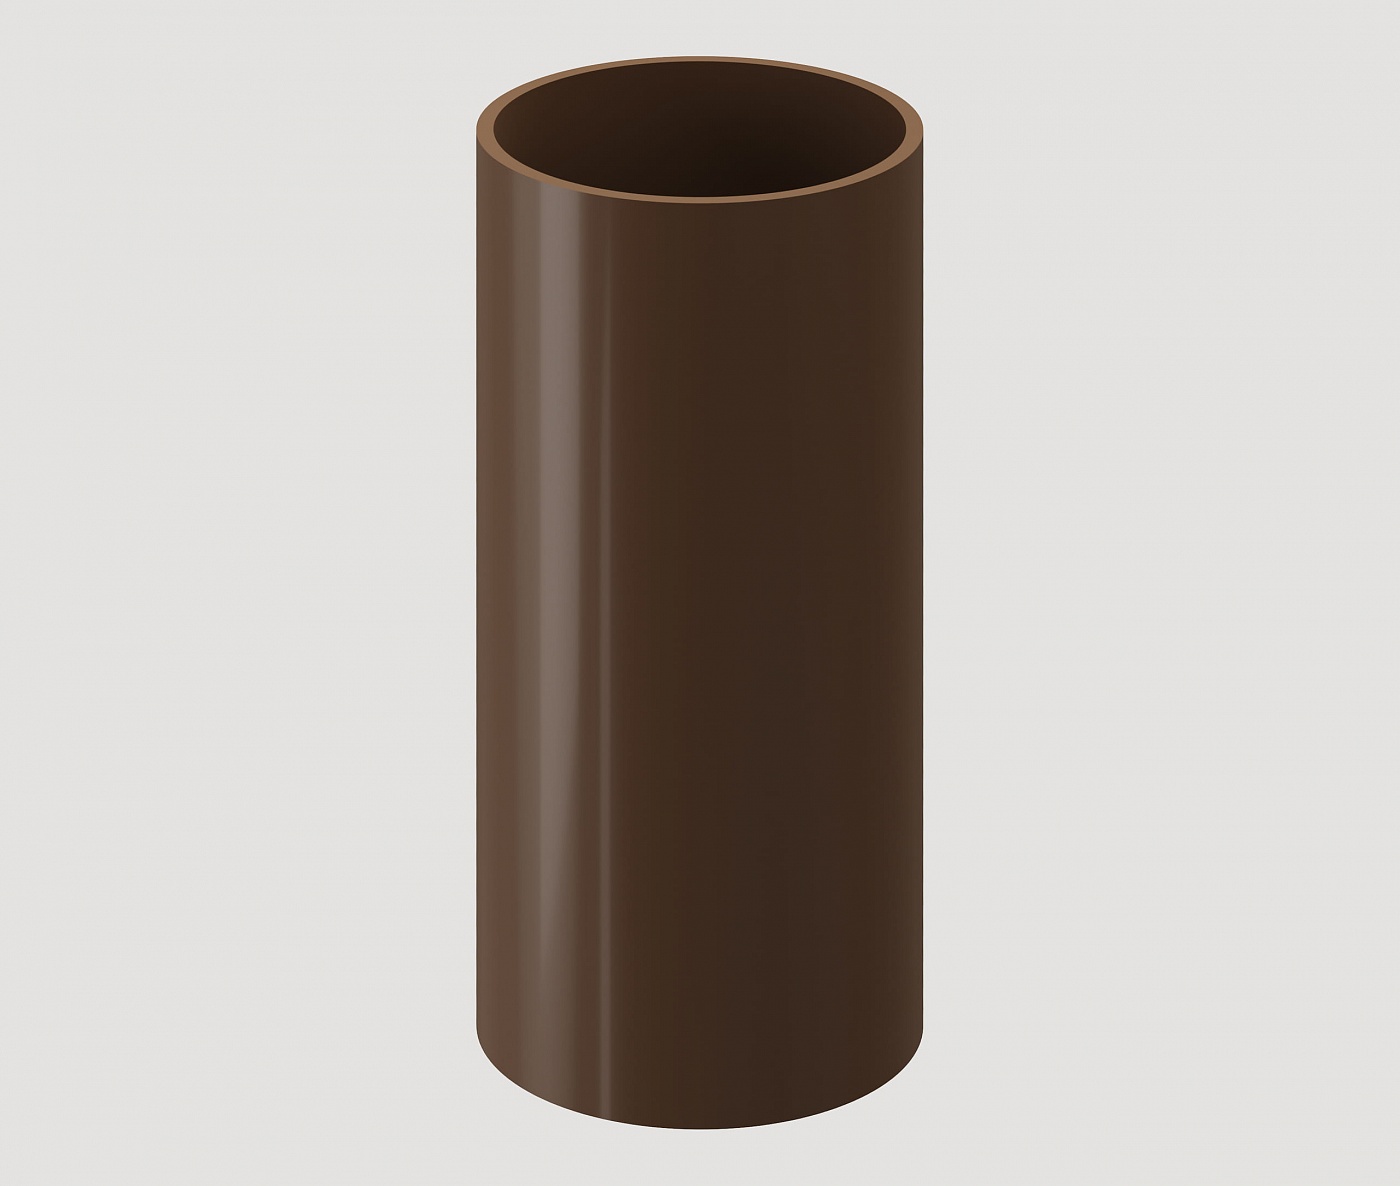 Водостоки - STANDARD SERIES Light brown RAL 8019 - Elements of the drainage system - Pipe 3m